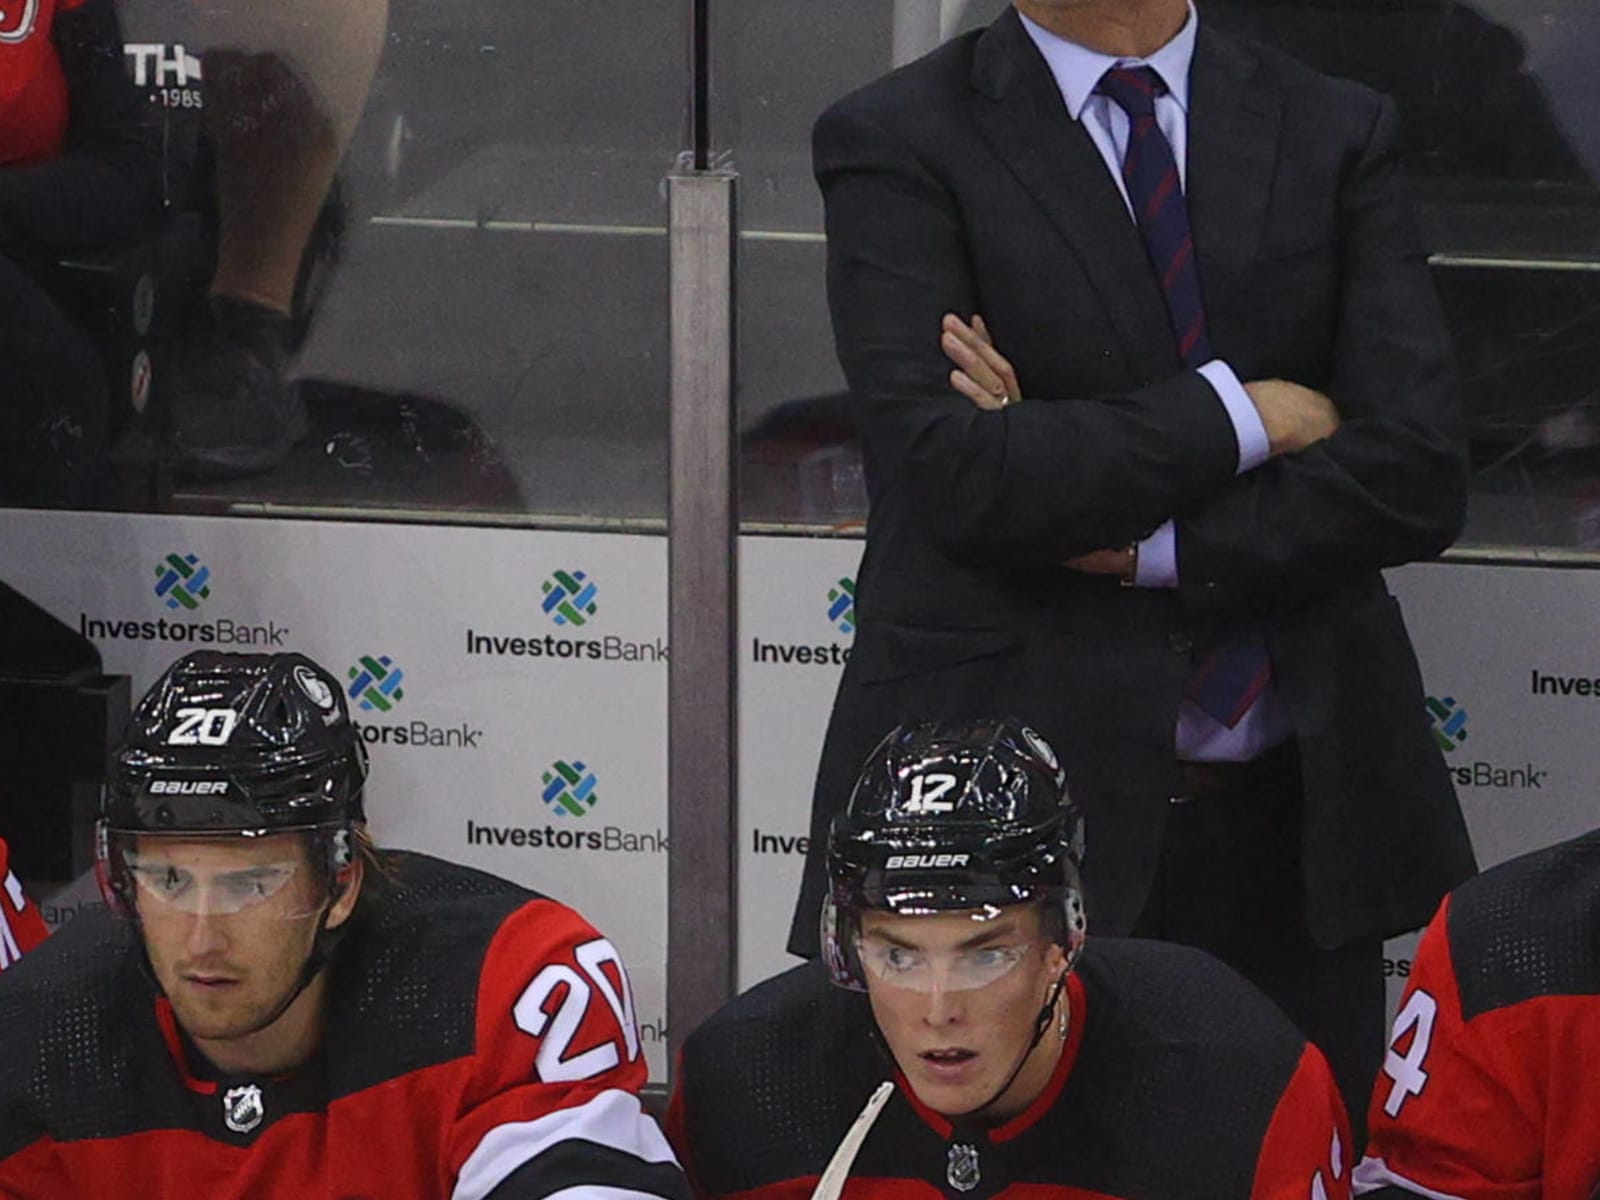 Devils coach Lindy Ruff tests positive, misses Oilers game